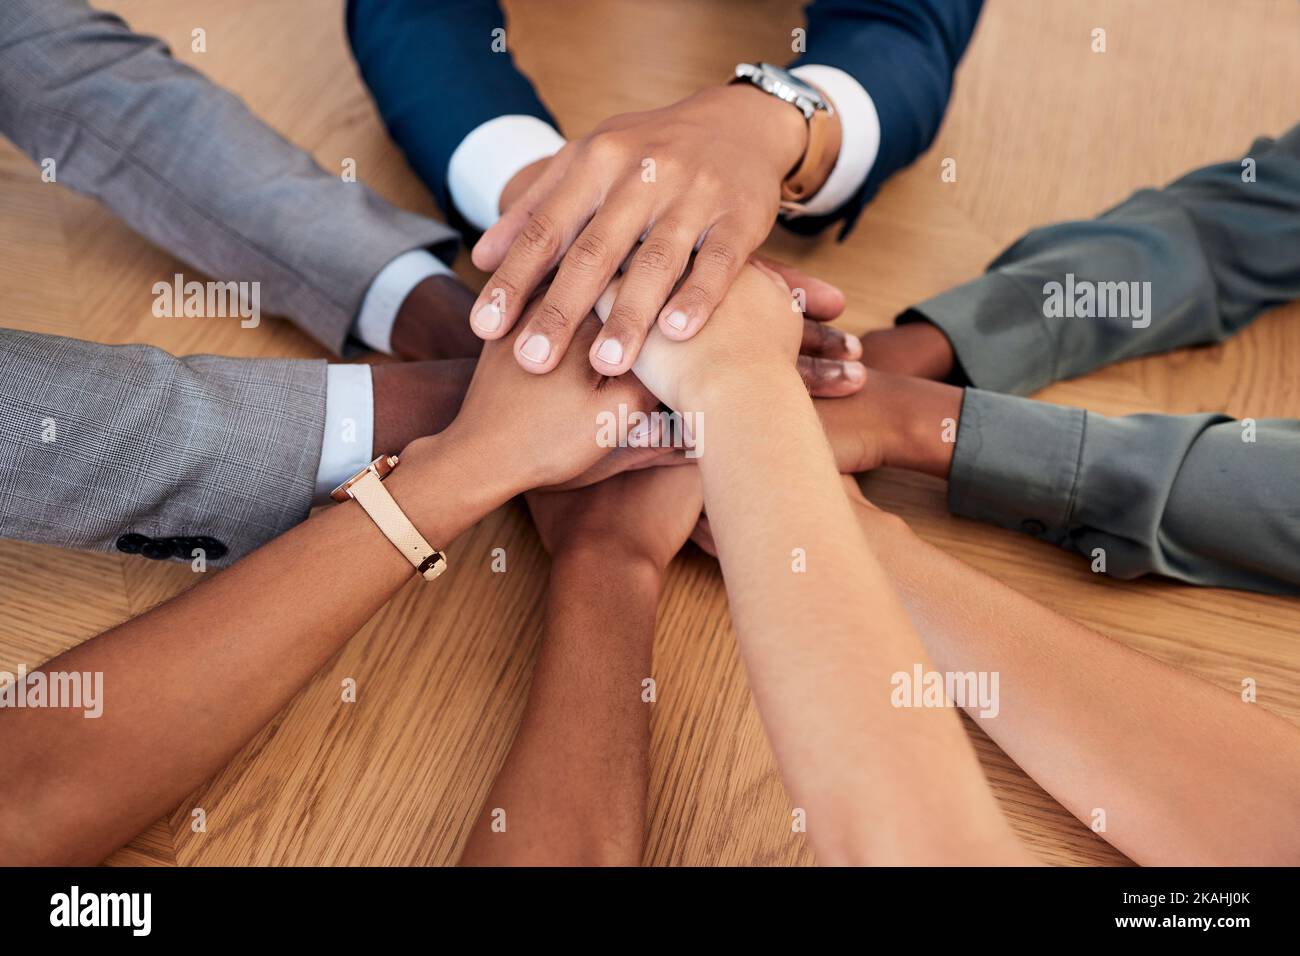 Support, partnership and hands of diversity business people stack together in solidarity, trust and teamwork collaboration. Community, team building Stock Photo